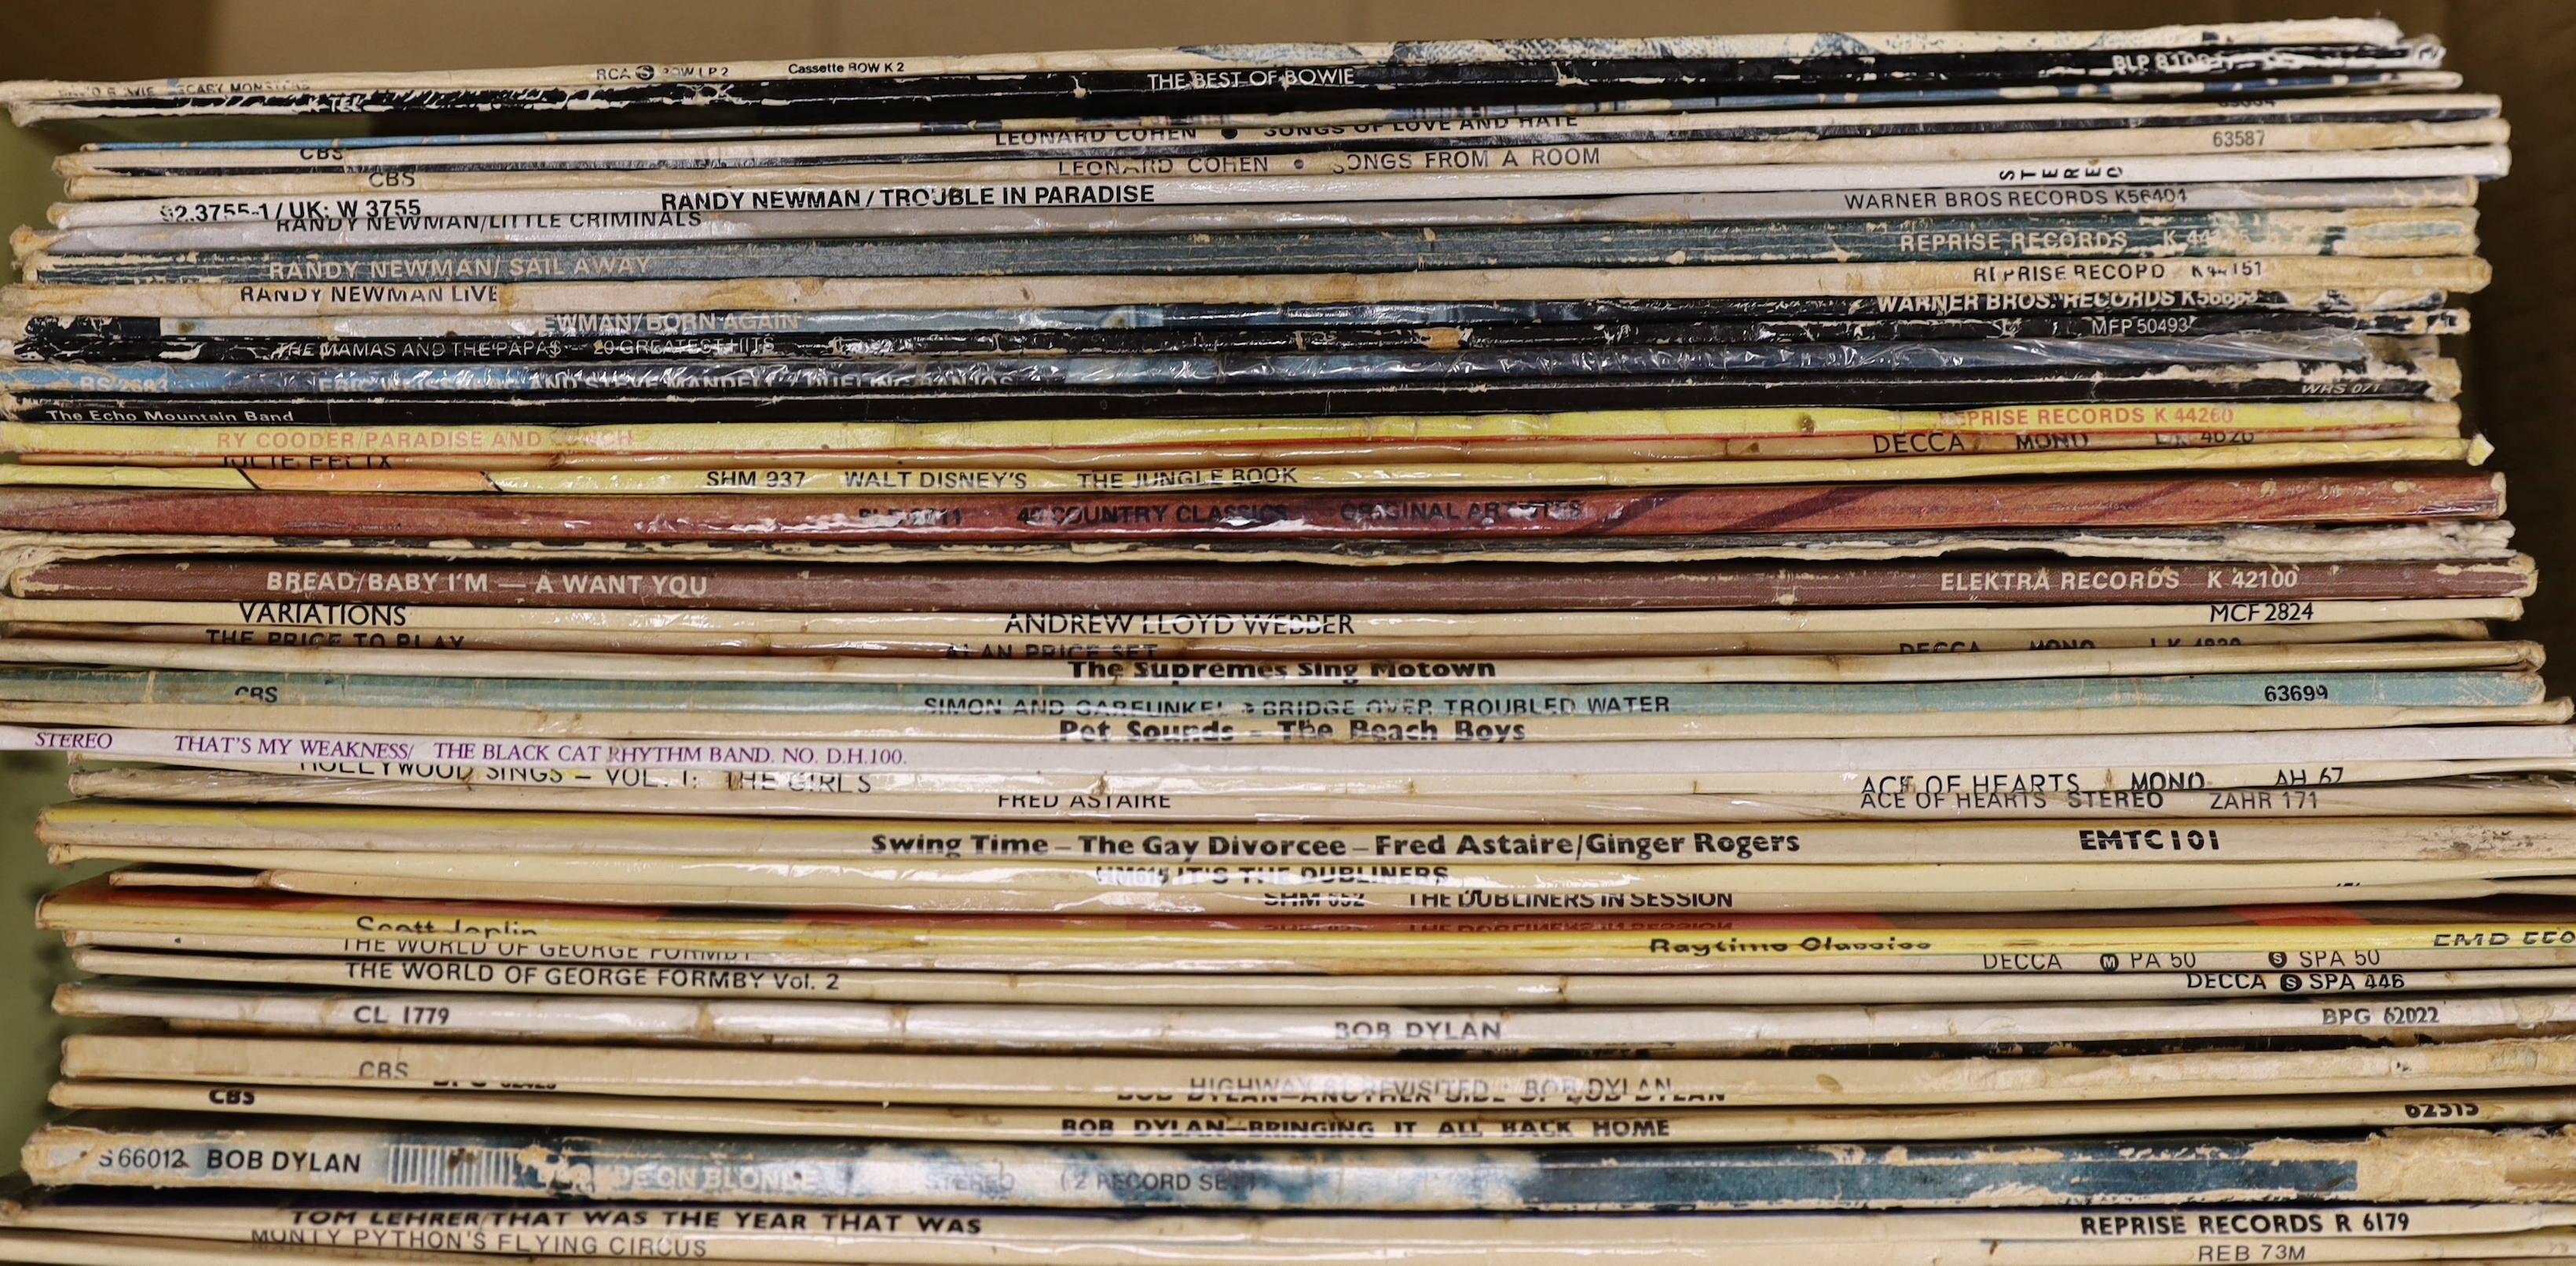 Fifty mainly 1970s LPs, including David Bowie, Leonard Cohen, Randy Newman, Bob Dylan, Simon & Garfunkel, and a number of comedy etc LPs, including Monty Python, Peter, Sellers, Private Eye, etc